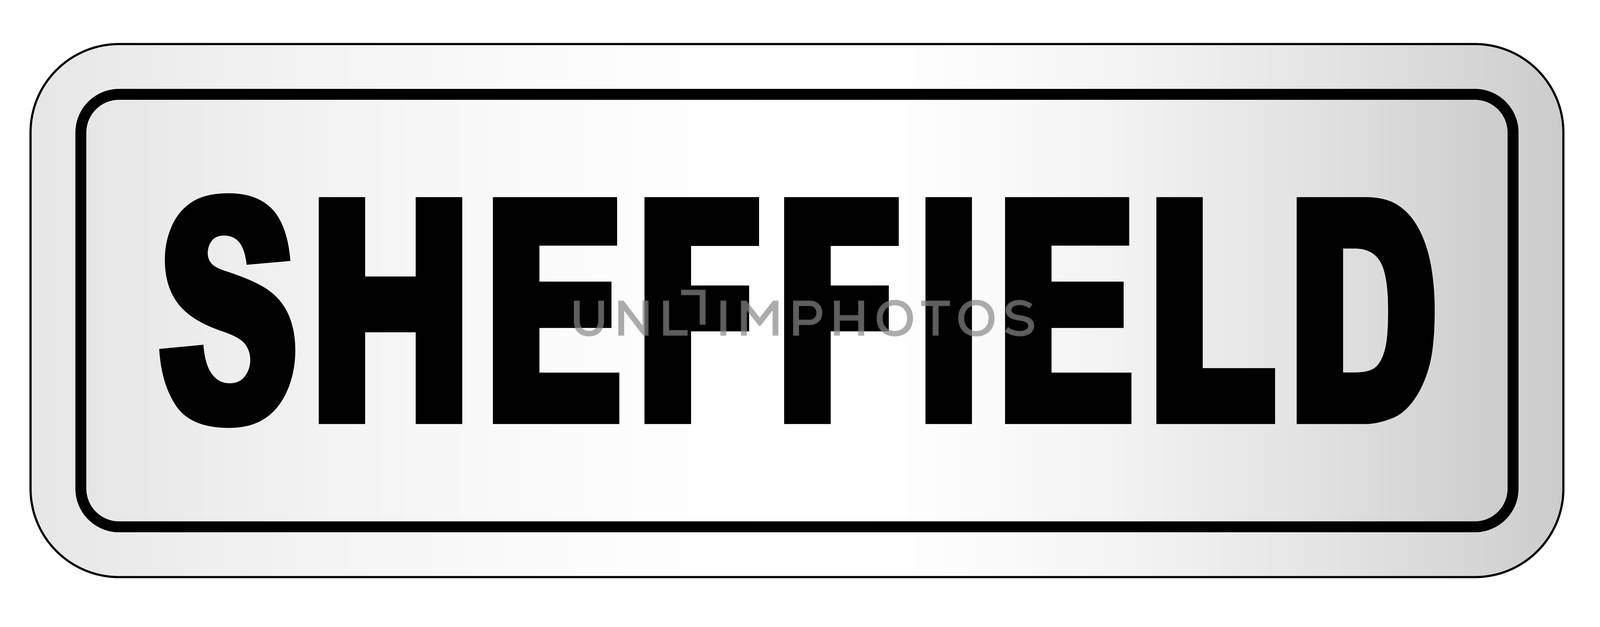 The city of Sheffielf nameplate on a white background